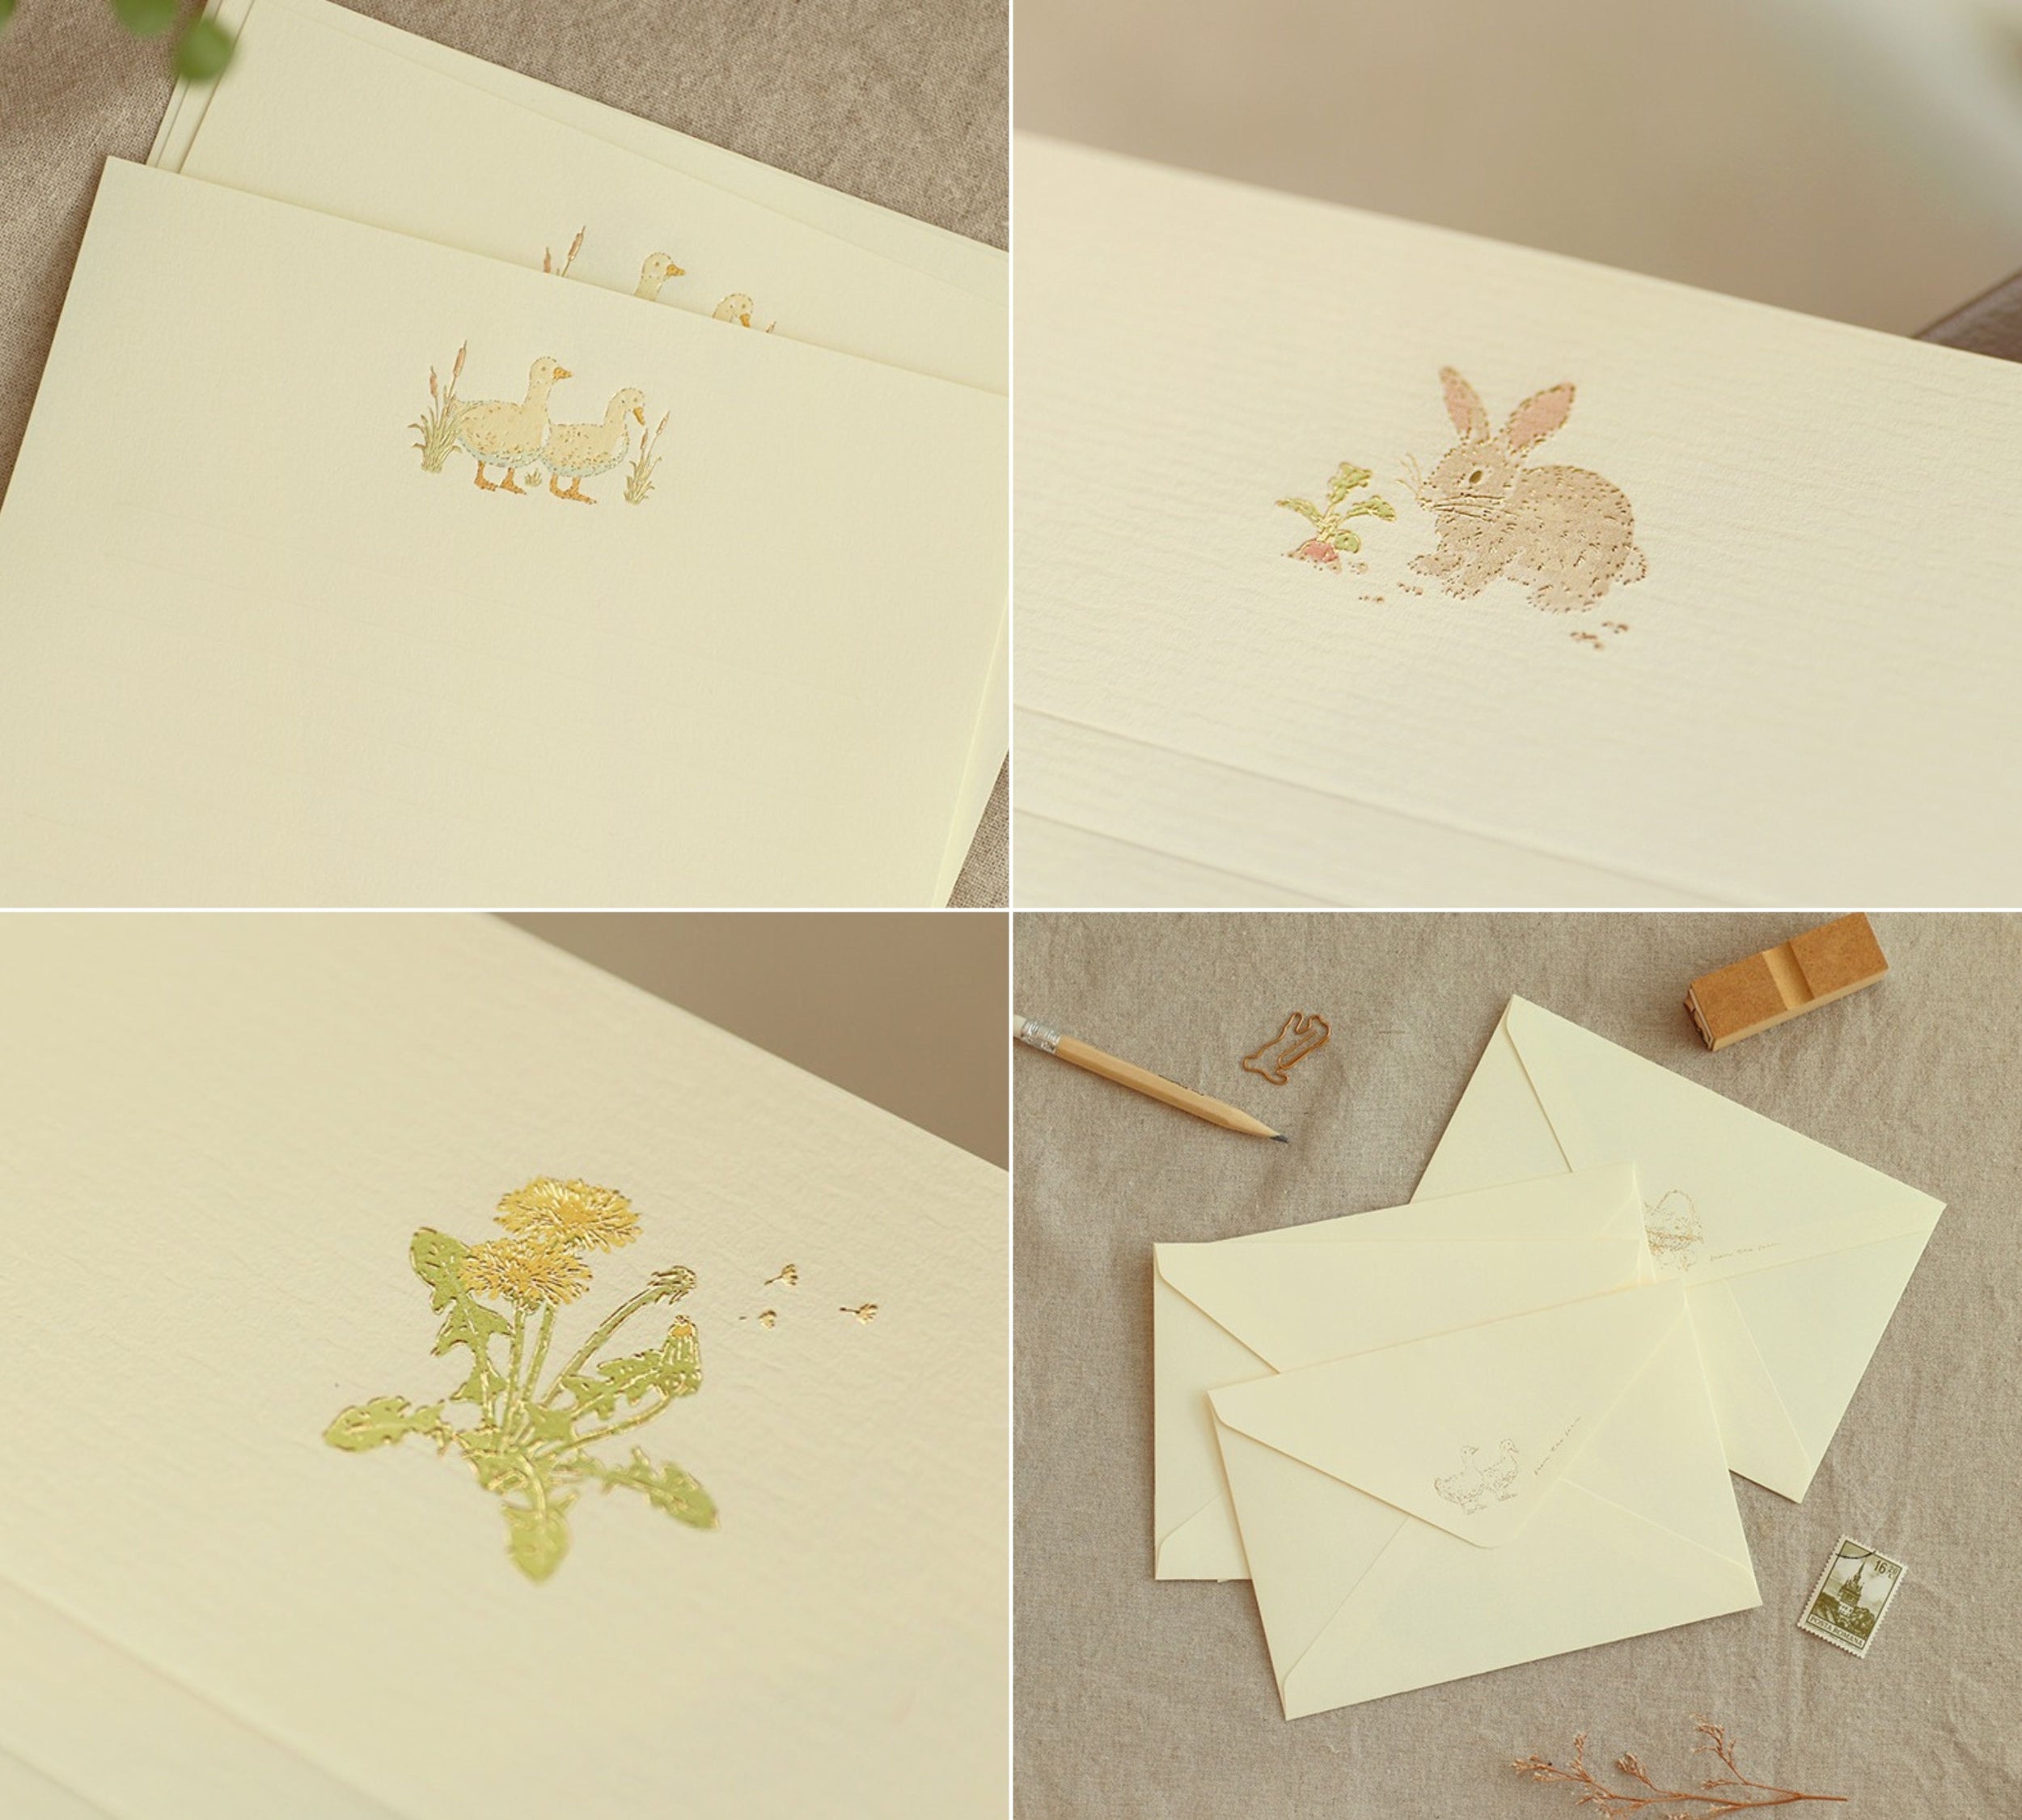 Premium Letter Writing Paper and Envelope Set Stationery Writing Paper Set